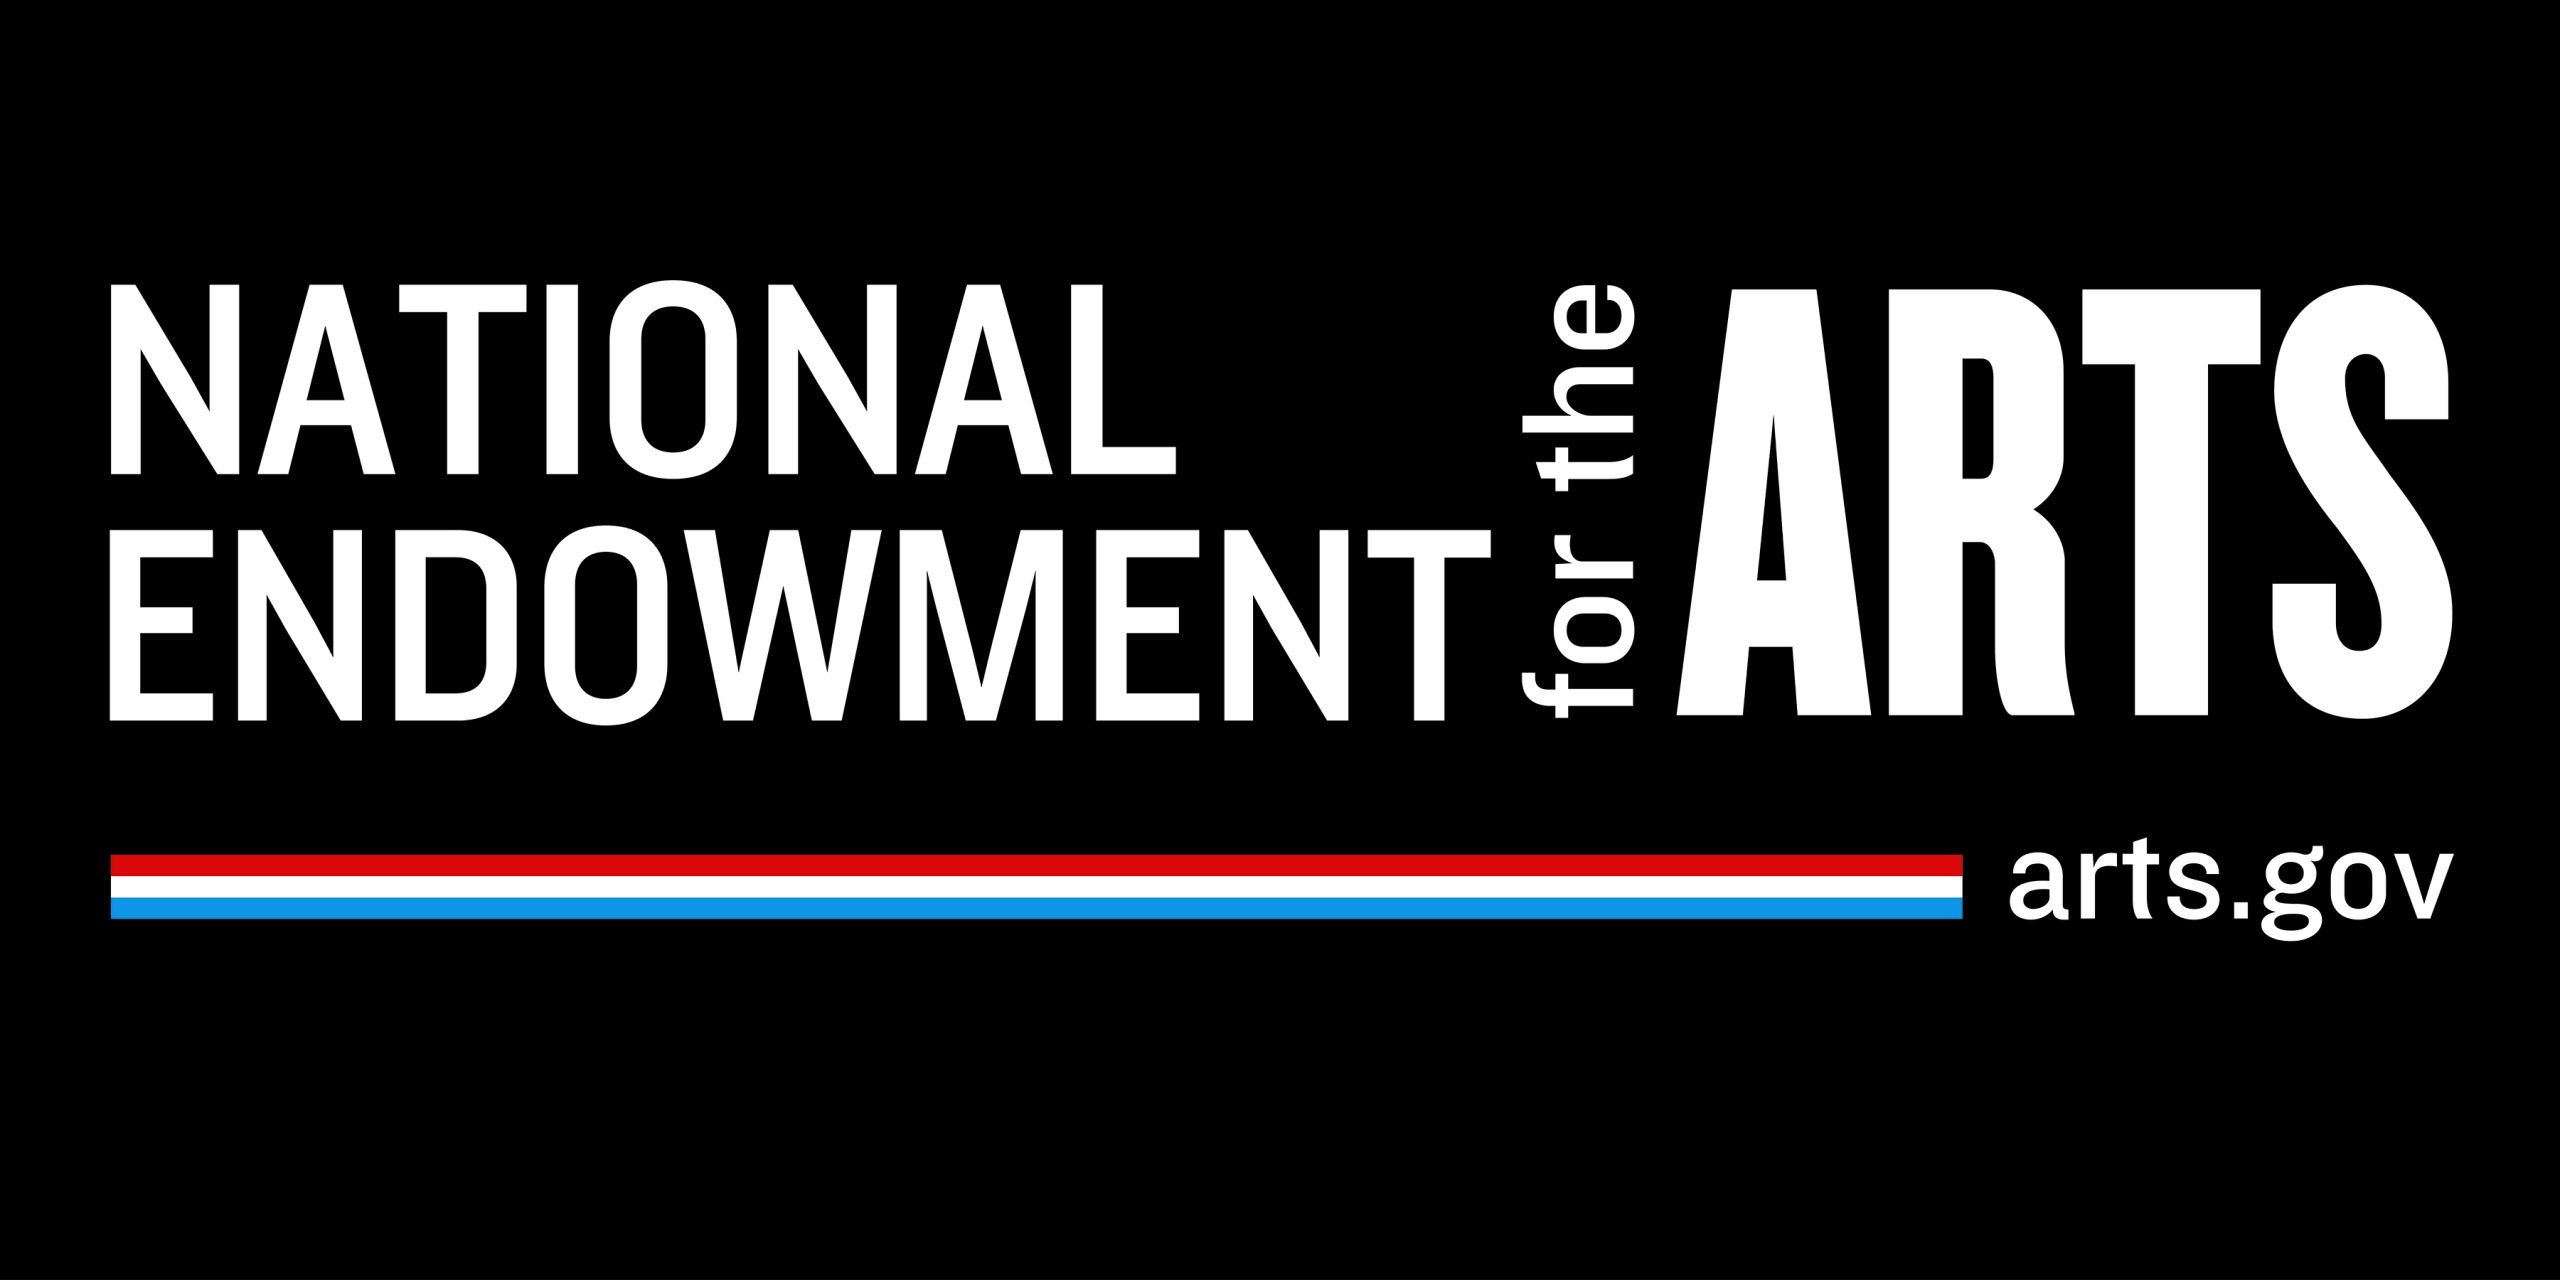 Black background, white lettering "National Endowment for the Arts"